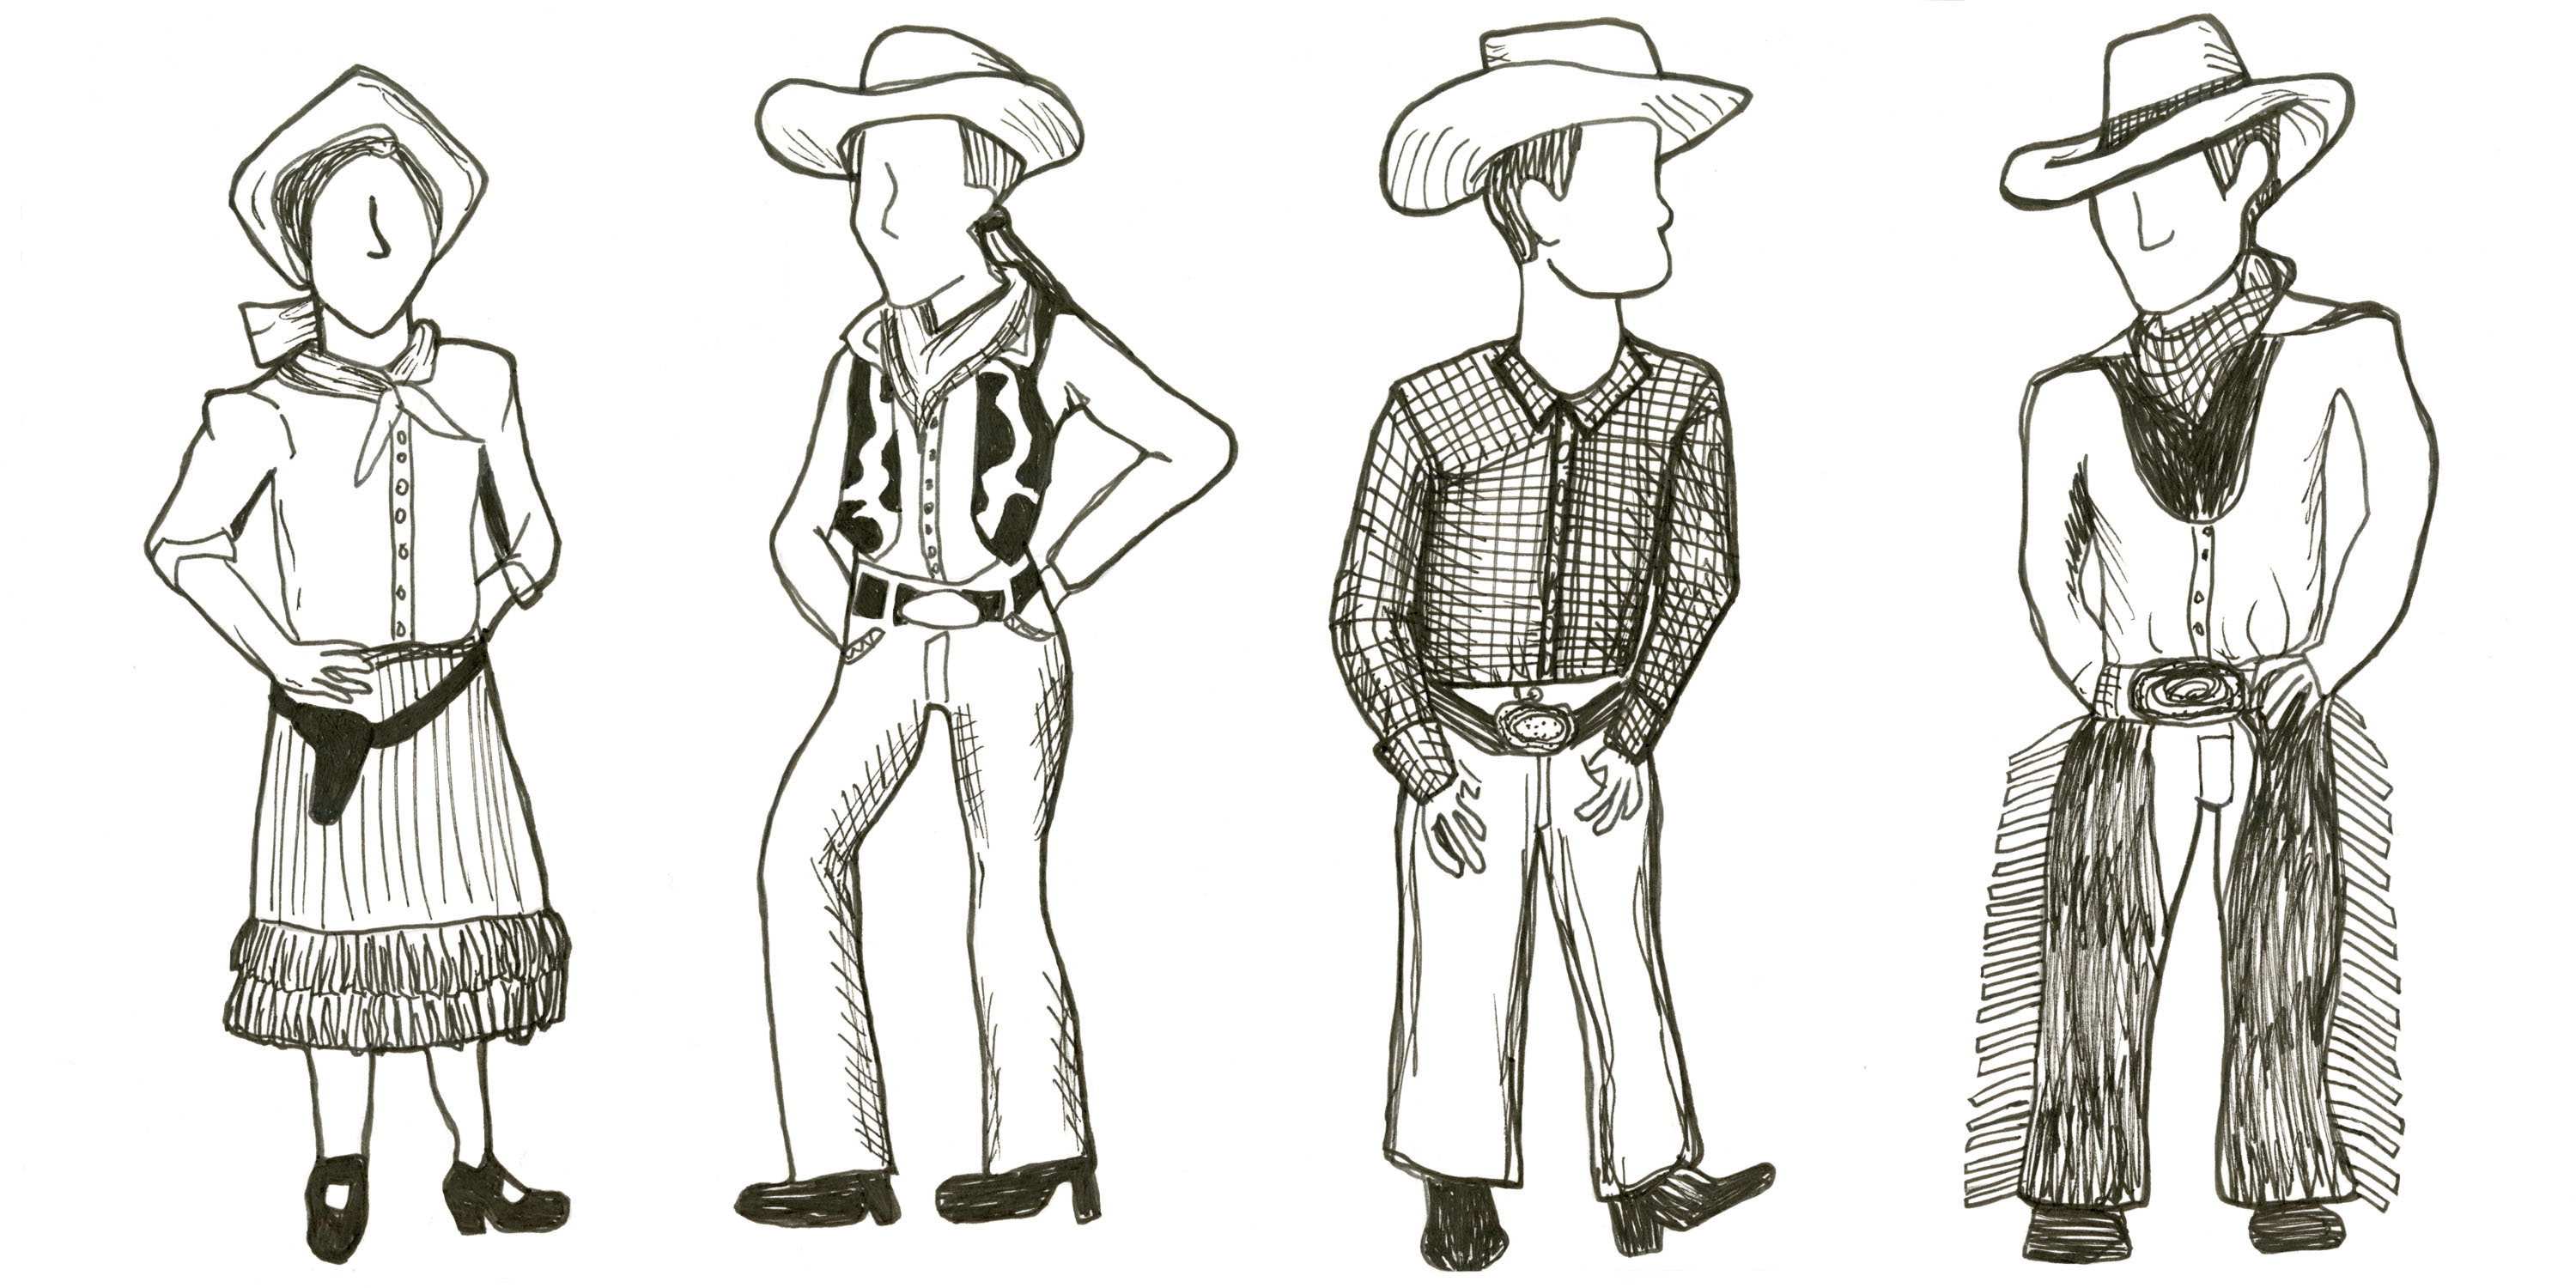 Cowboy-Cowgirl-Cowculture: Is Western Wear a New Reality? – Fourteen East